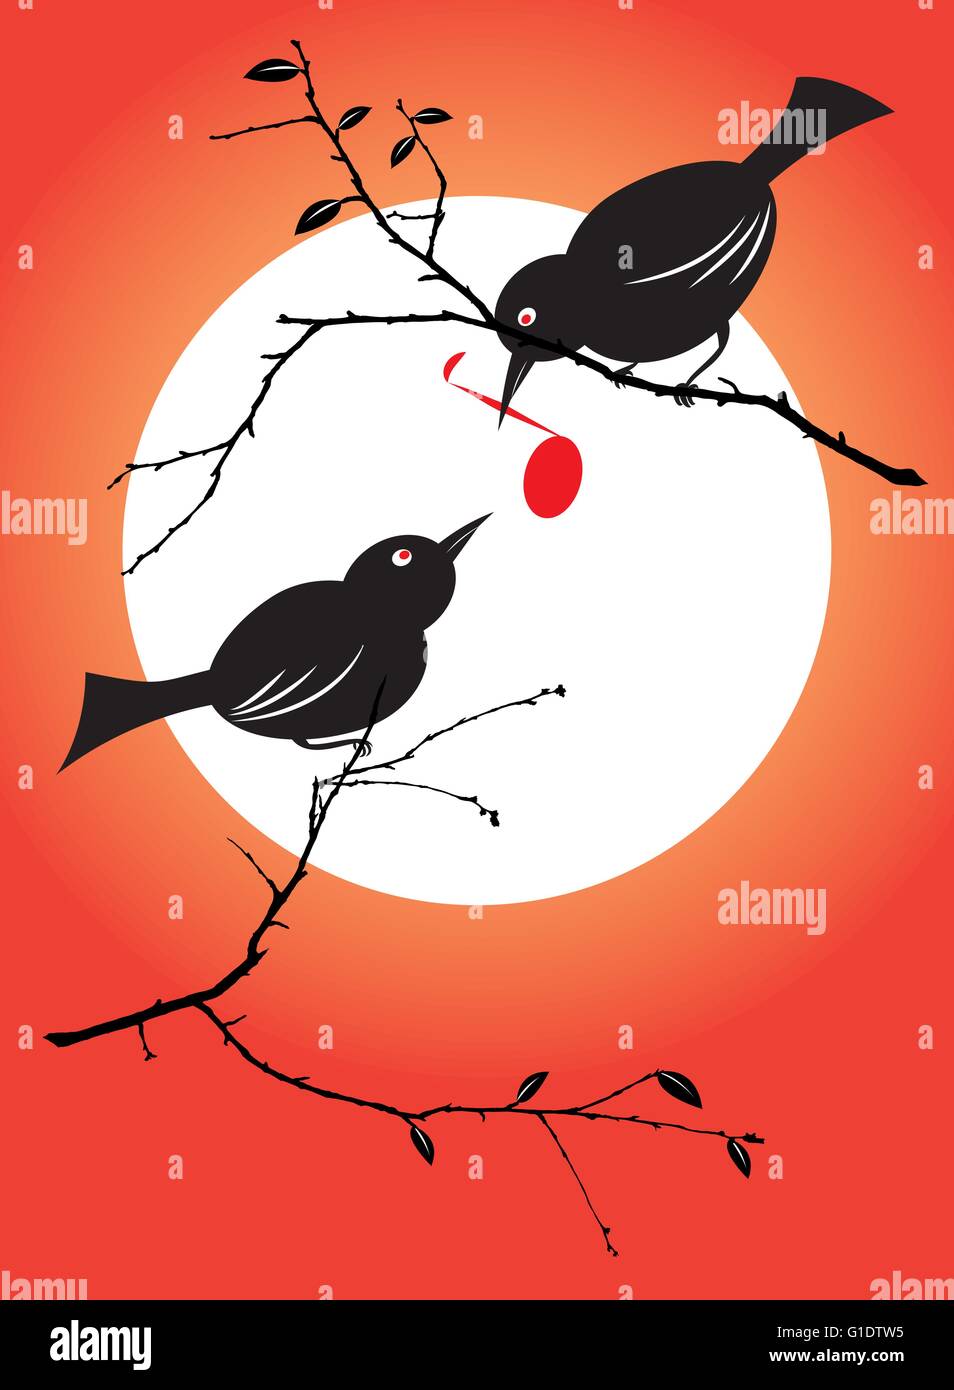 vector illustration of a bird couple feeding each other with a musical symbol Stock Vector